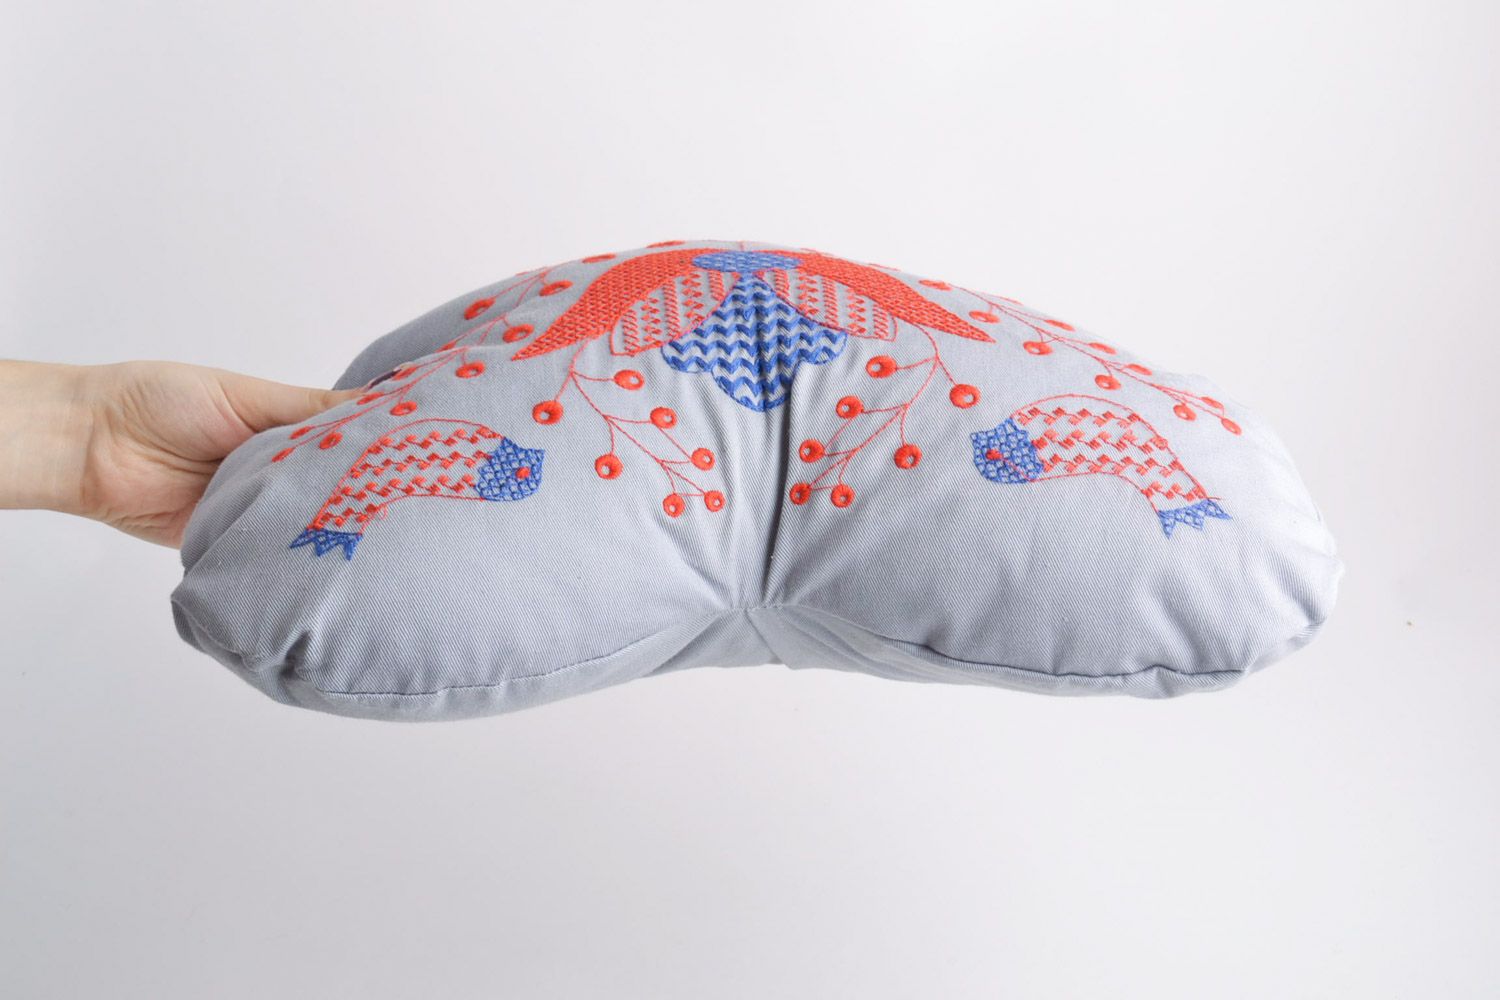 Handmade heart-shaped accent pillow sewn of light fabric with ethnic embroidery photo 5